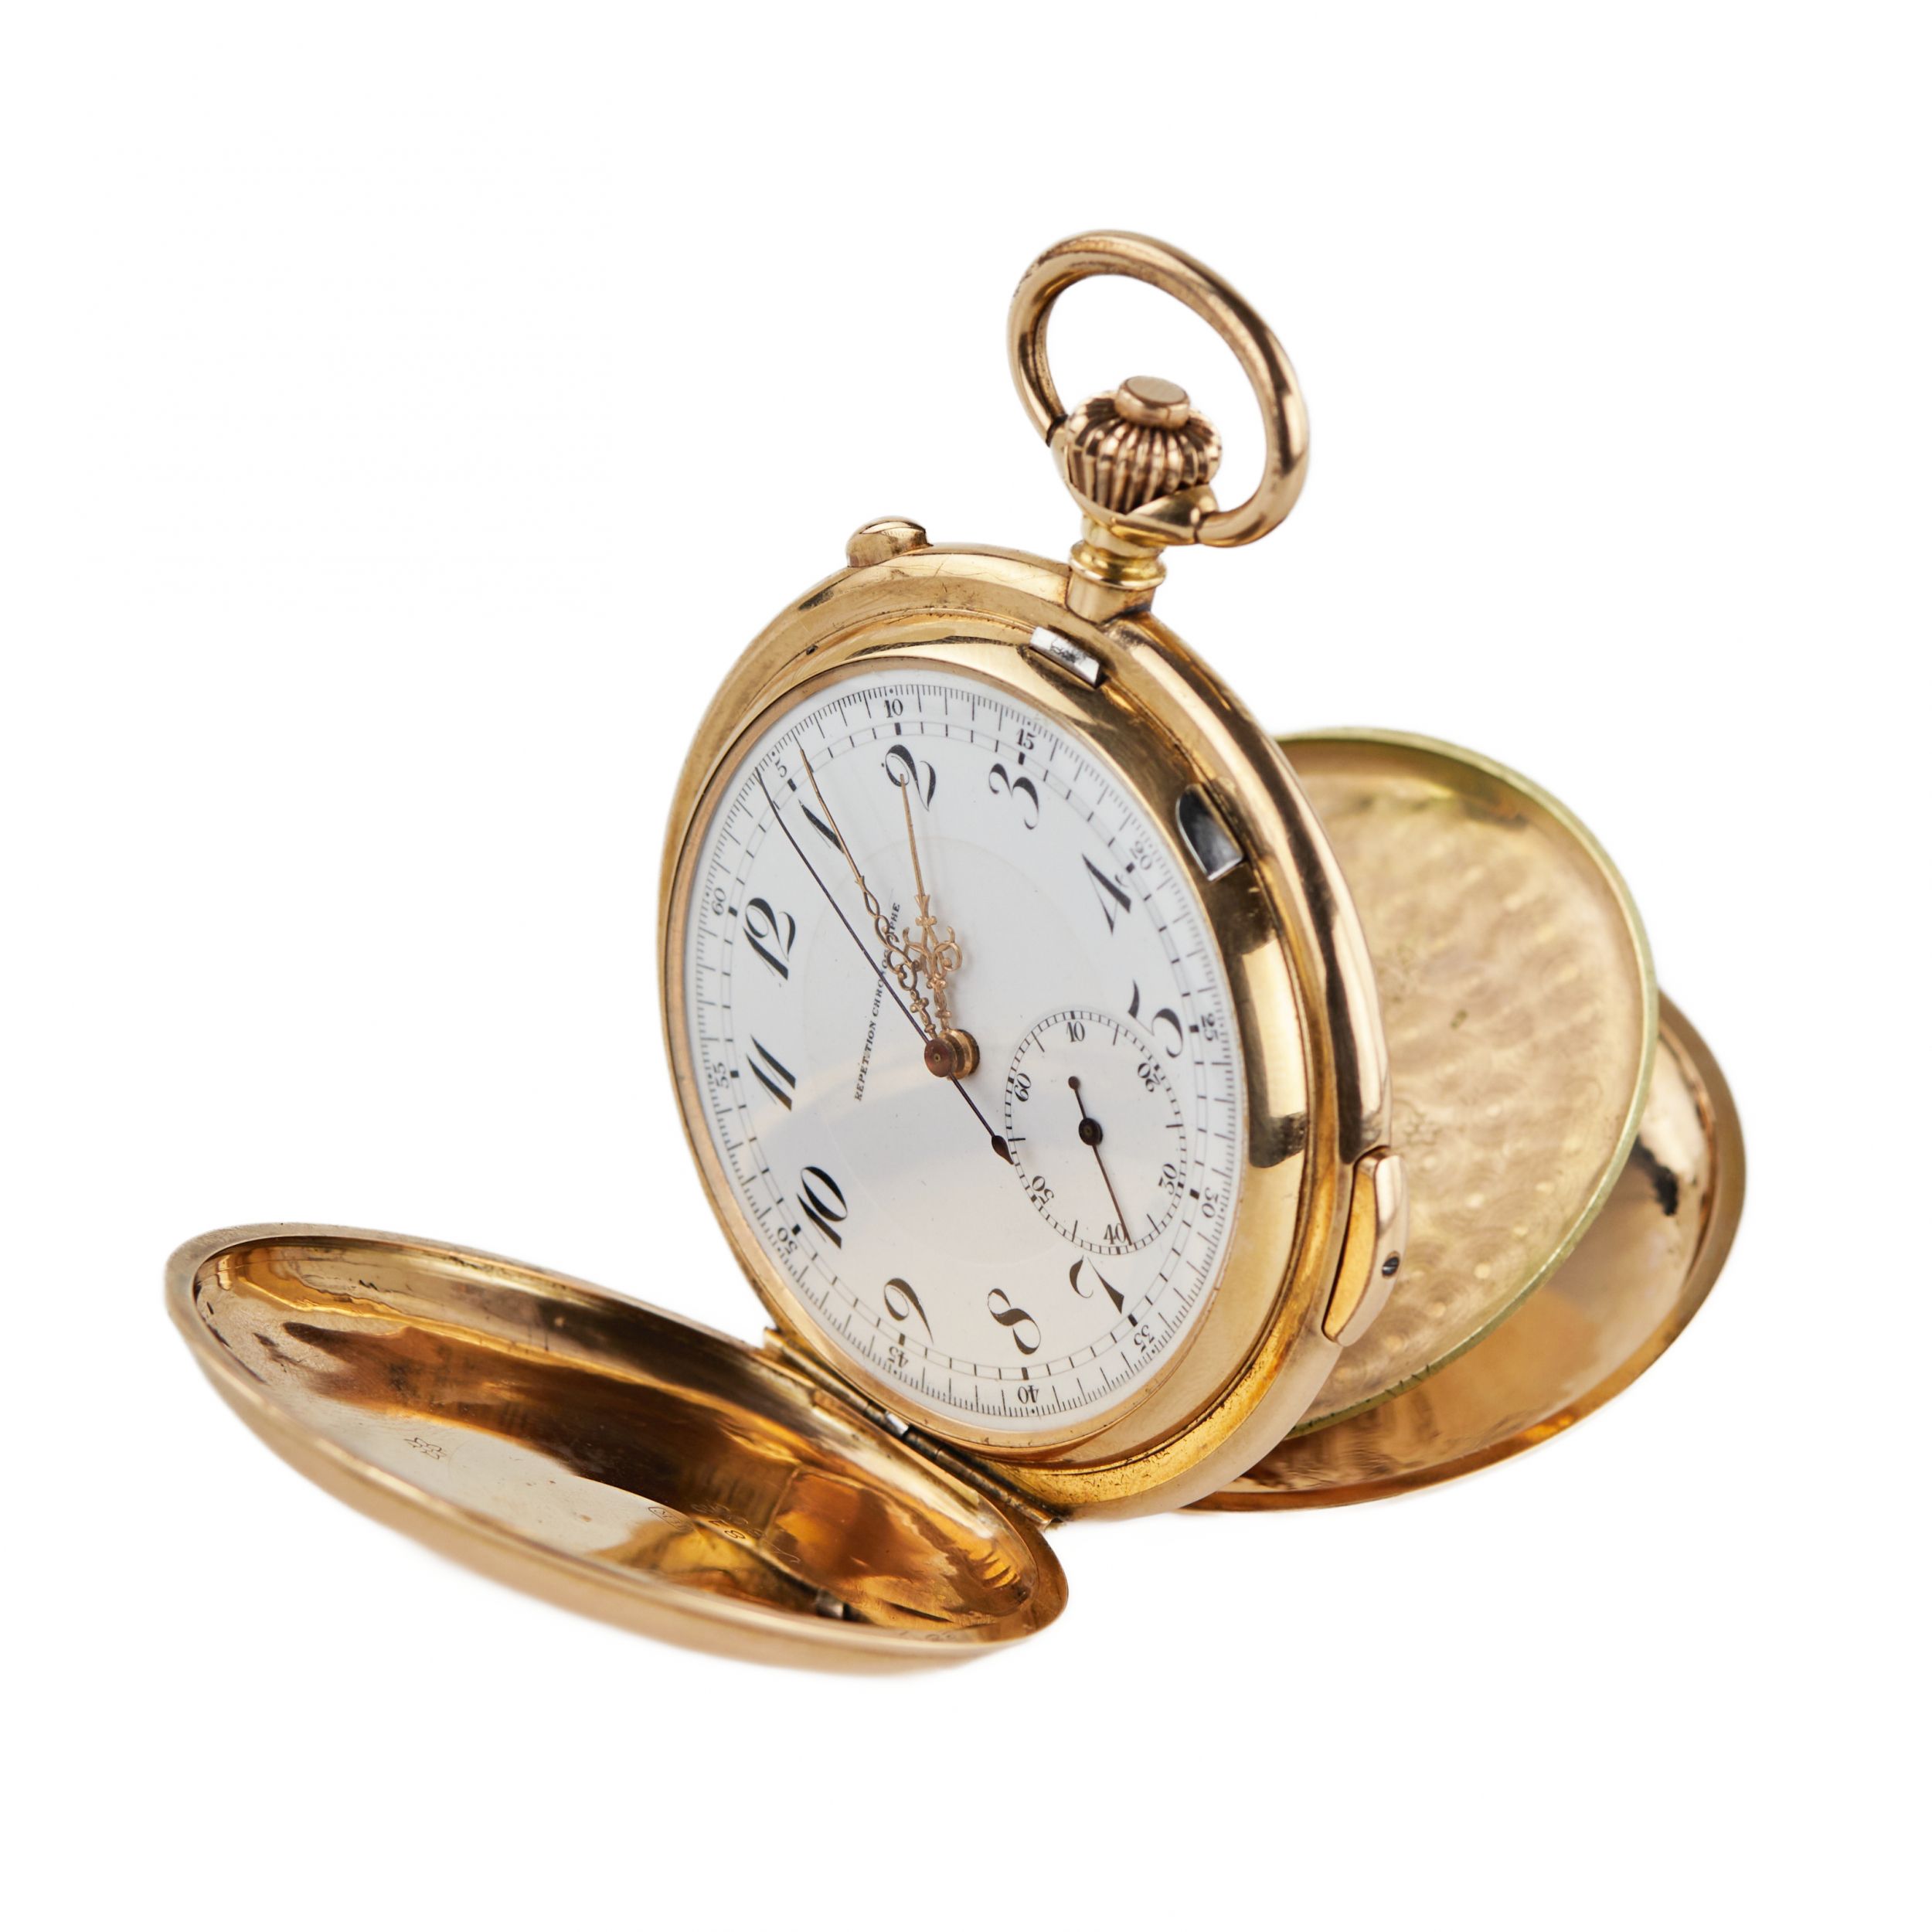 Heures Repetition Quarts Taschenuhr Chronographe 14k Gold Pocket Watch - Image 7 of 11